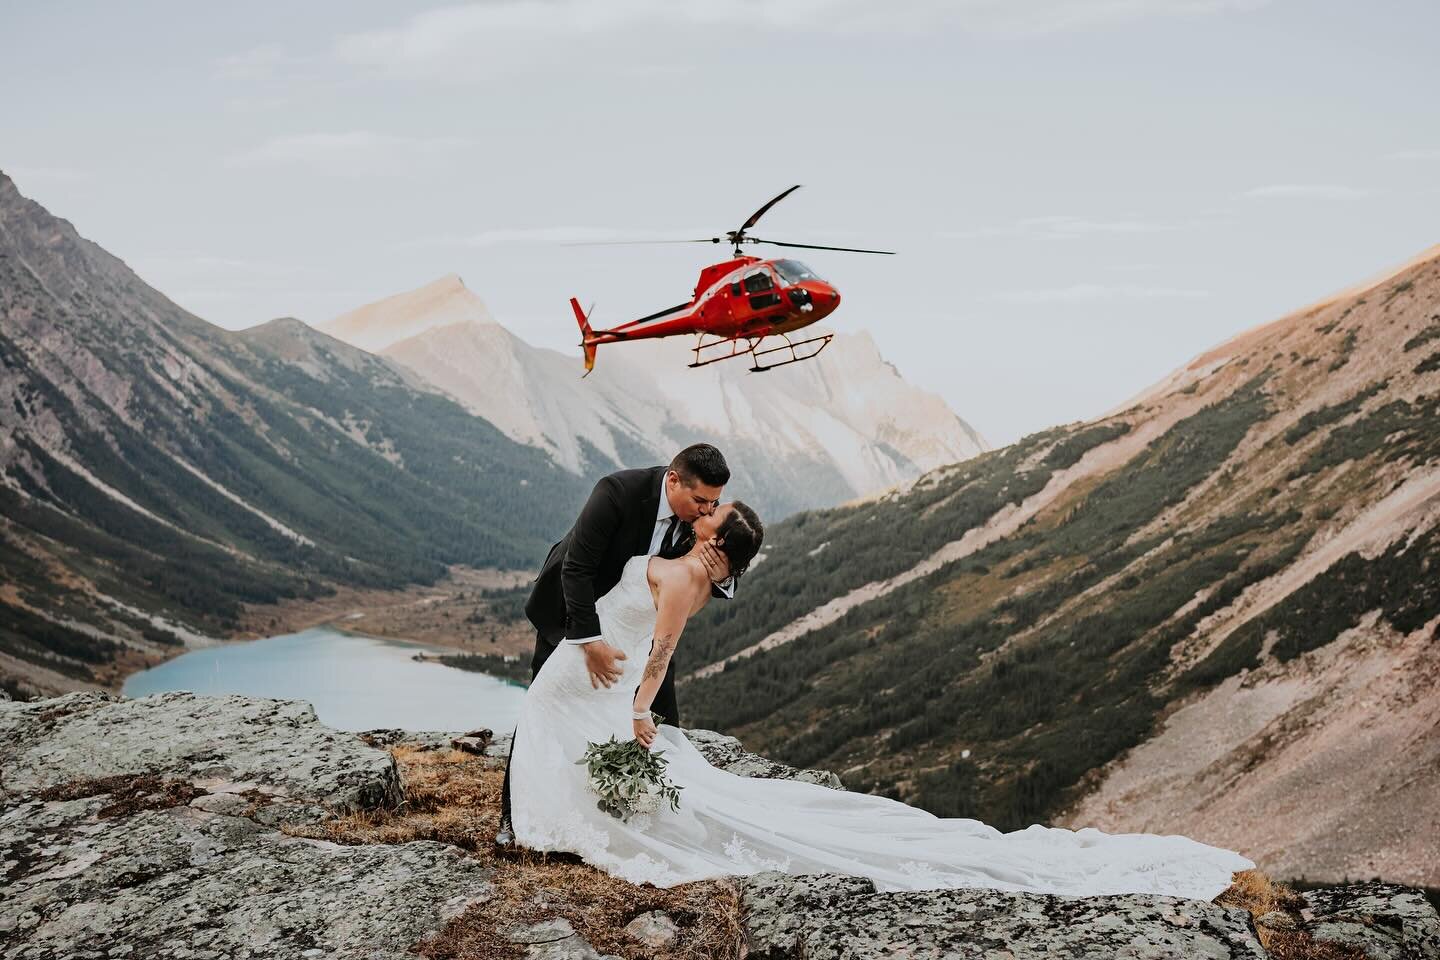 Looking to say &lsquo;I do&rsquo; in the most unforgettable way? Take a cue from Amanda and Jim&rsquo;s helicopter elopement wedding amidst the stunning landscapes of Banff! Their day was filled with love, laughter, and picture-perfect moments.
Head 